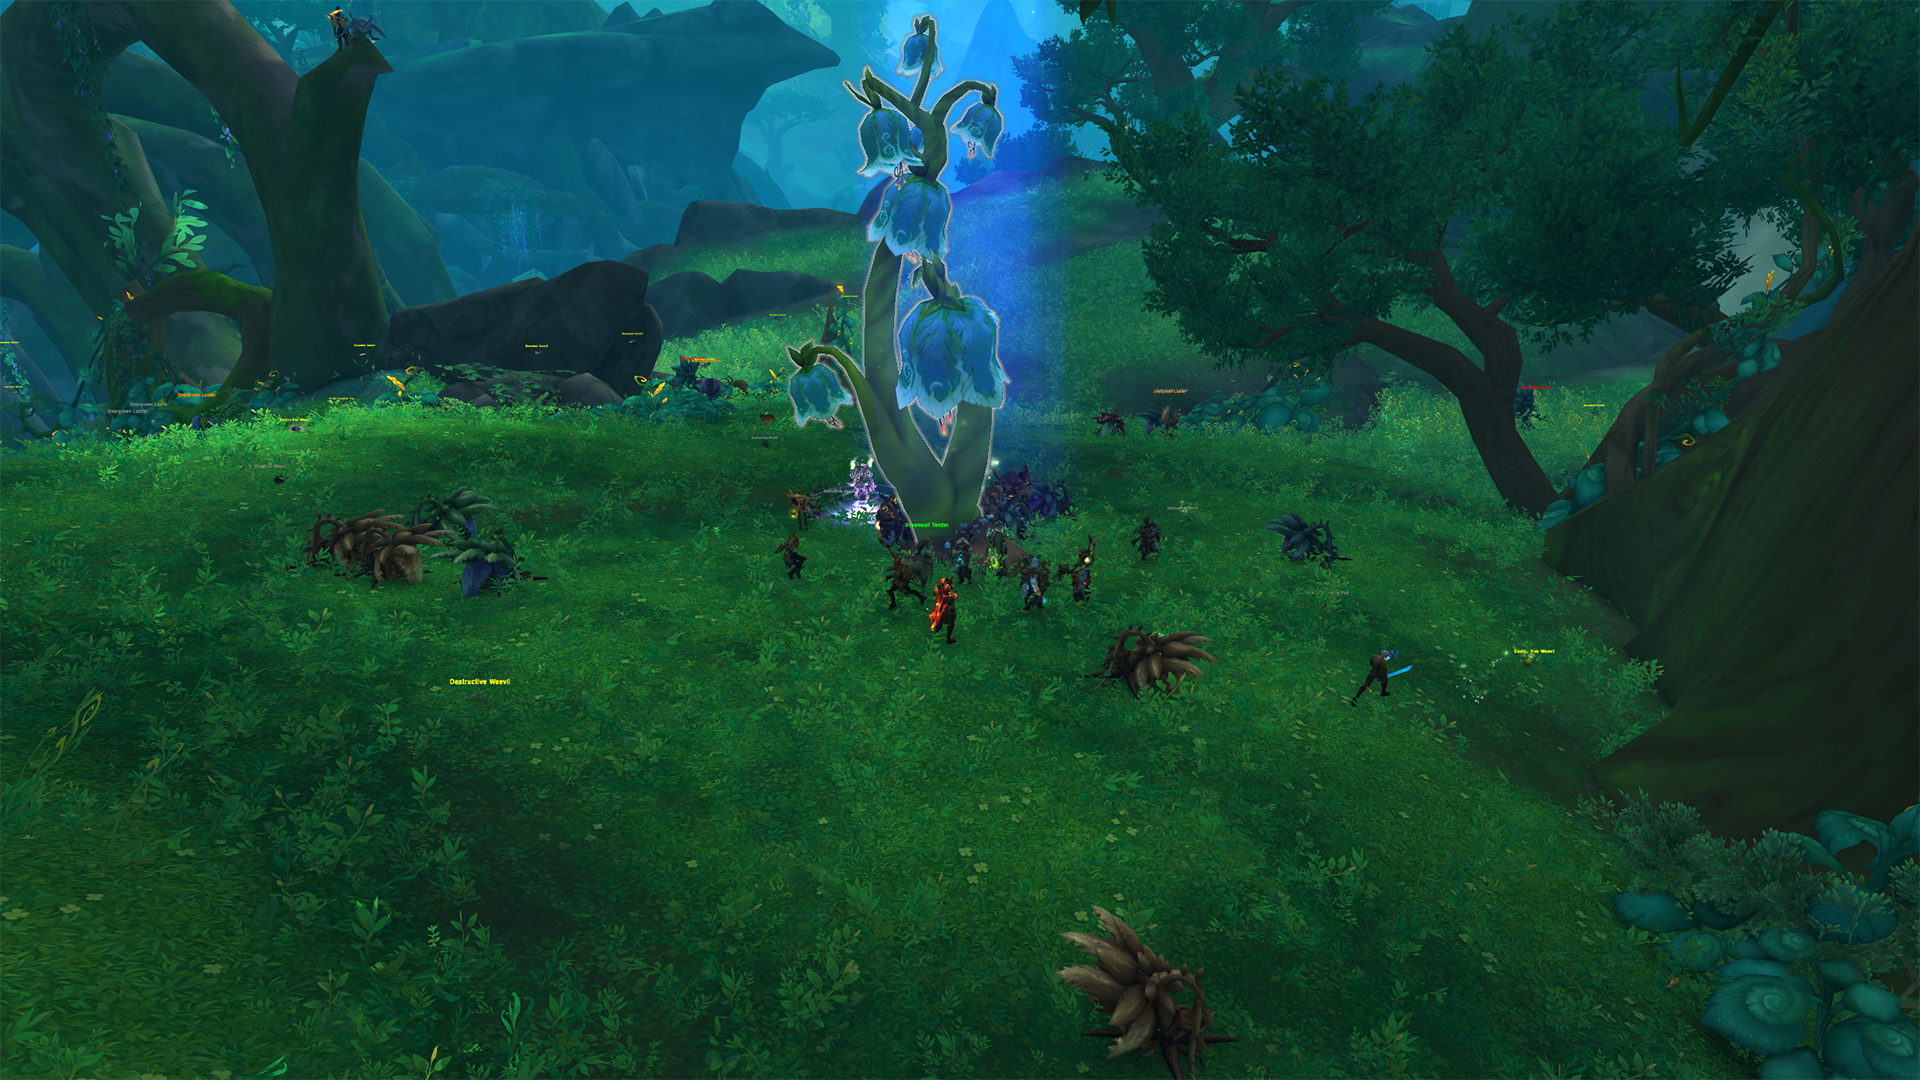 World of Warcraft players garden in the Guardians of the Dream patch